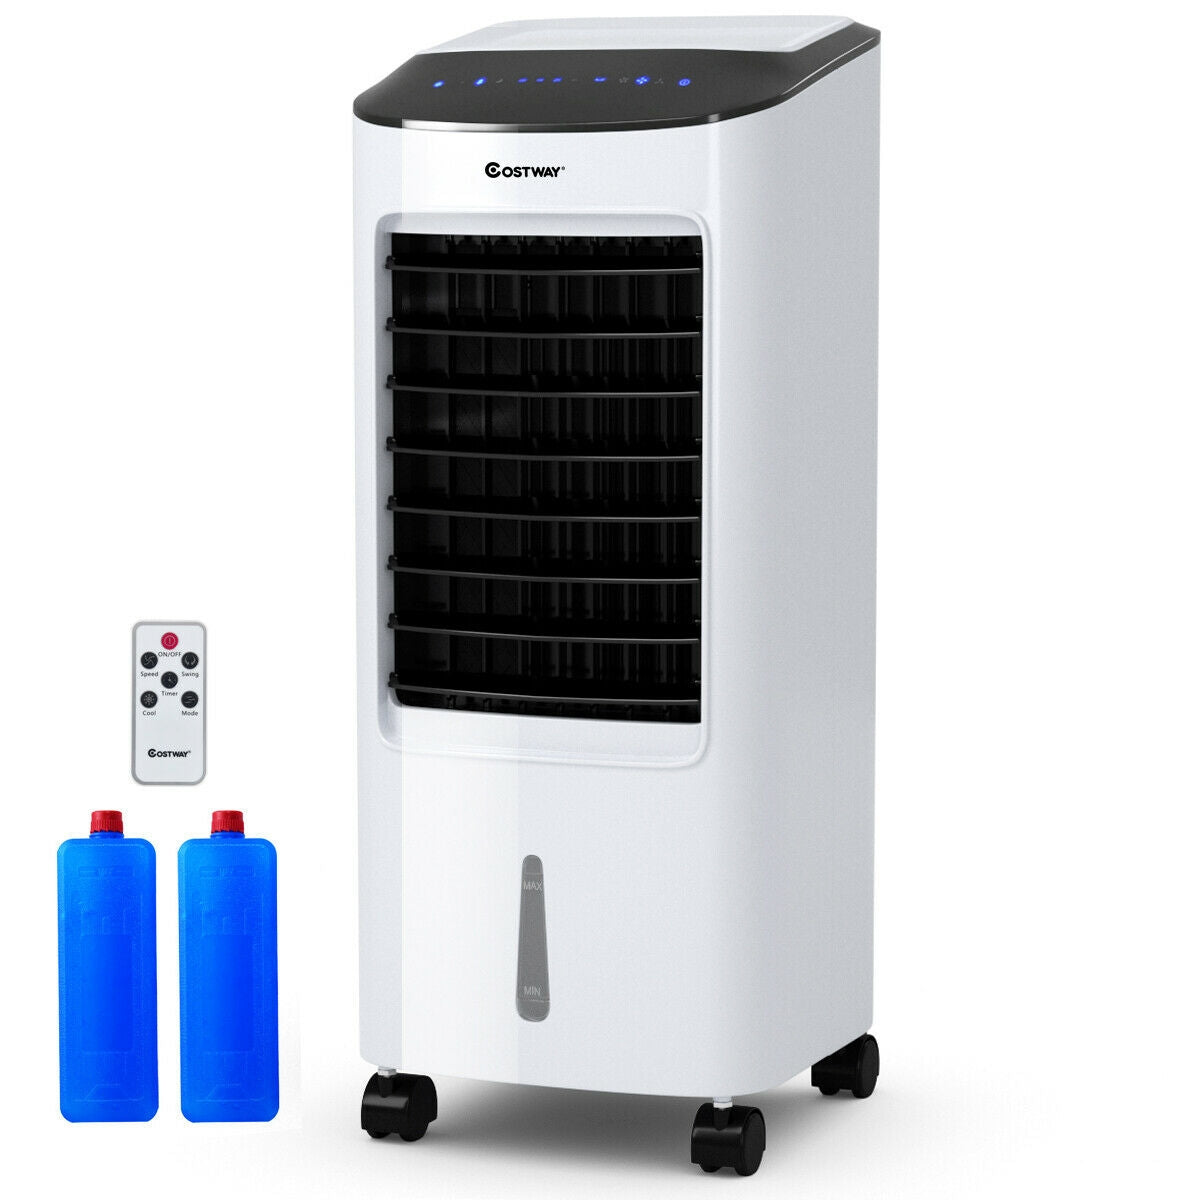 Costway Evaporative Portable Air Cooler Fan Humidifier with Remote Control for Home and Office